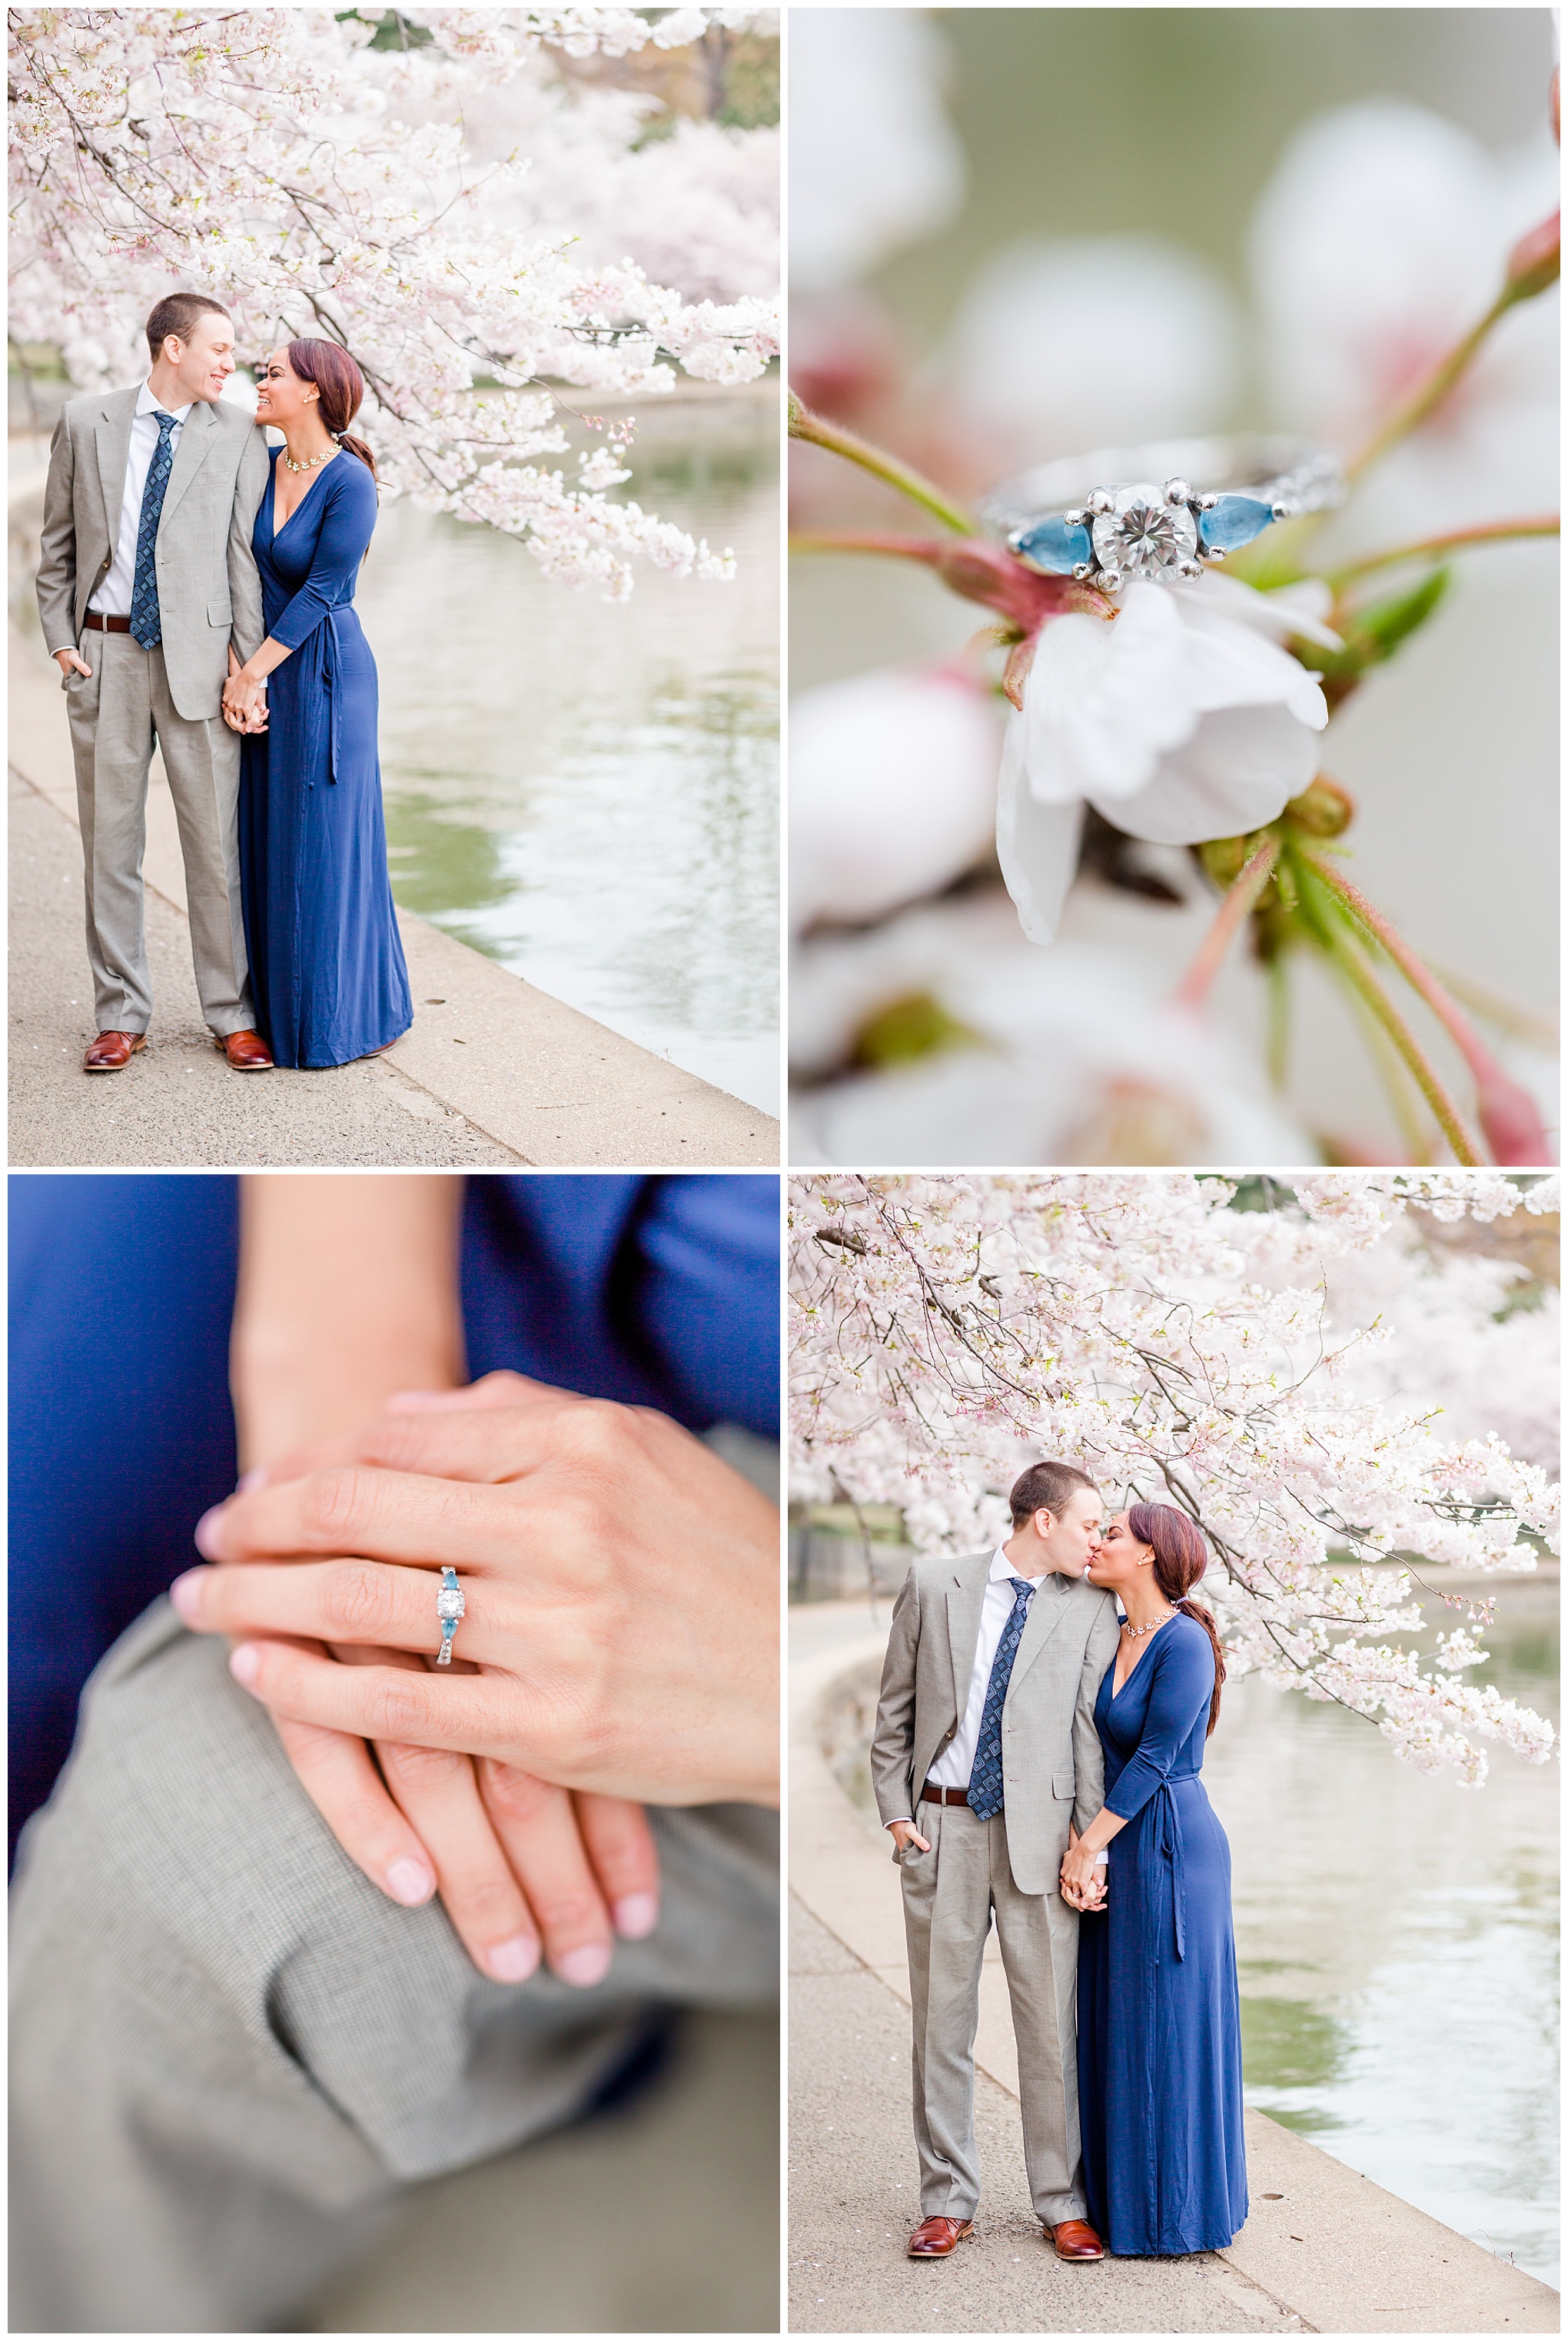 D.C. cherry blossoms engagement session, engagement session, D.C. engagement session, cherry blossoms, D.C. cherry blossoms, photo shoot outfit ideas, long navy wrap dress, long wrap dress, navy wrap dress, tidal basin, waterfront, engagement ring, diamond and auquamarine, aquamarine engagement ring, couple holding hands, D.C. engagement session